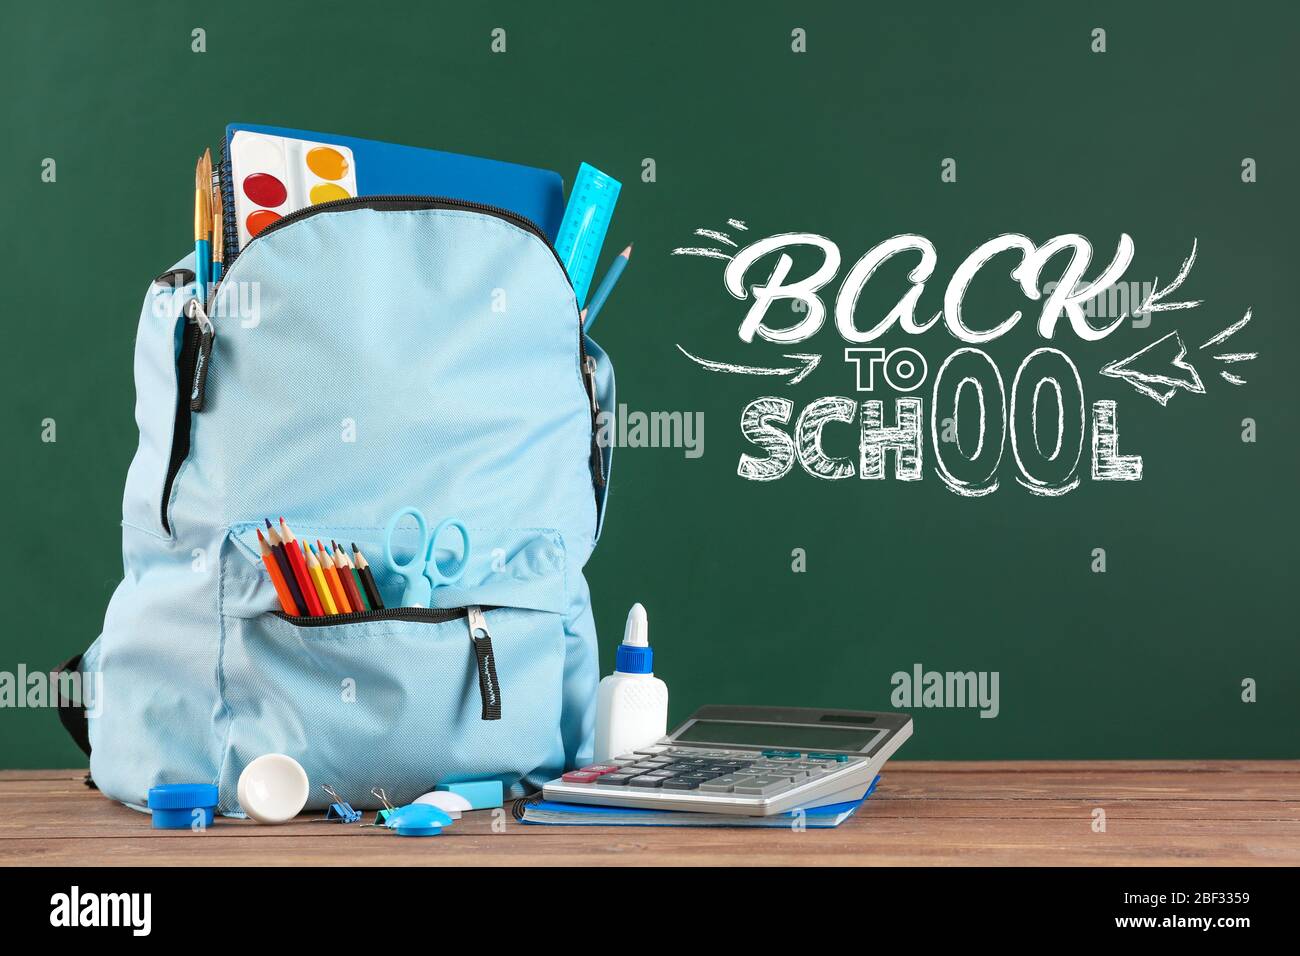 Backpack and stationery on table near blackboard with phrase BACK TO SCHOOL Stock Photo